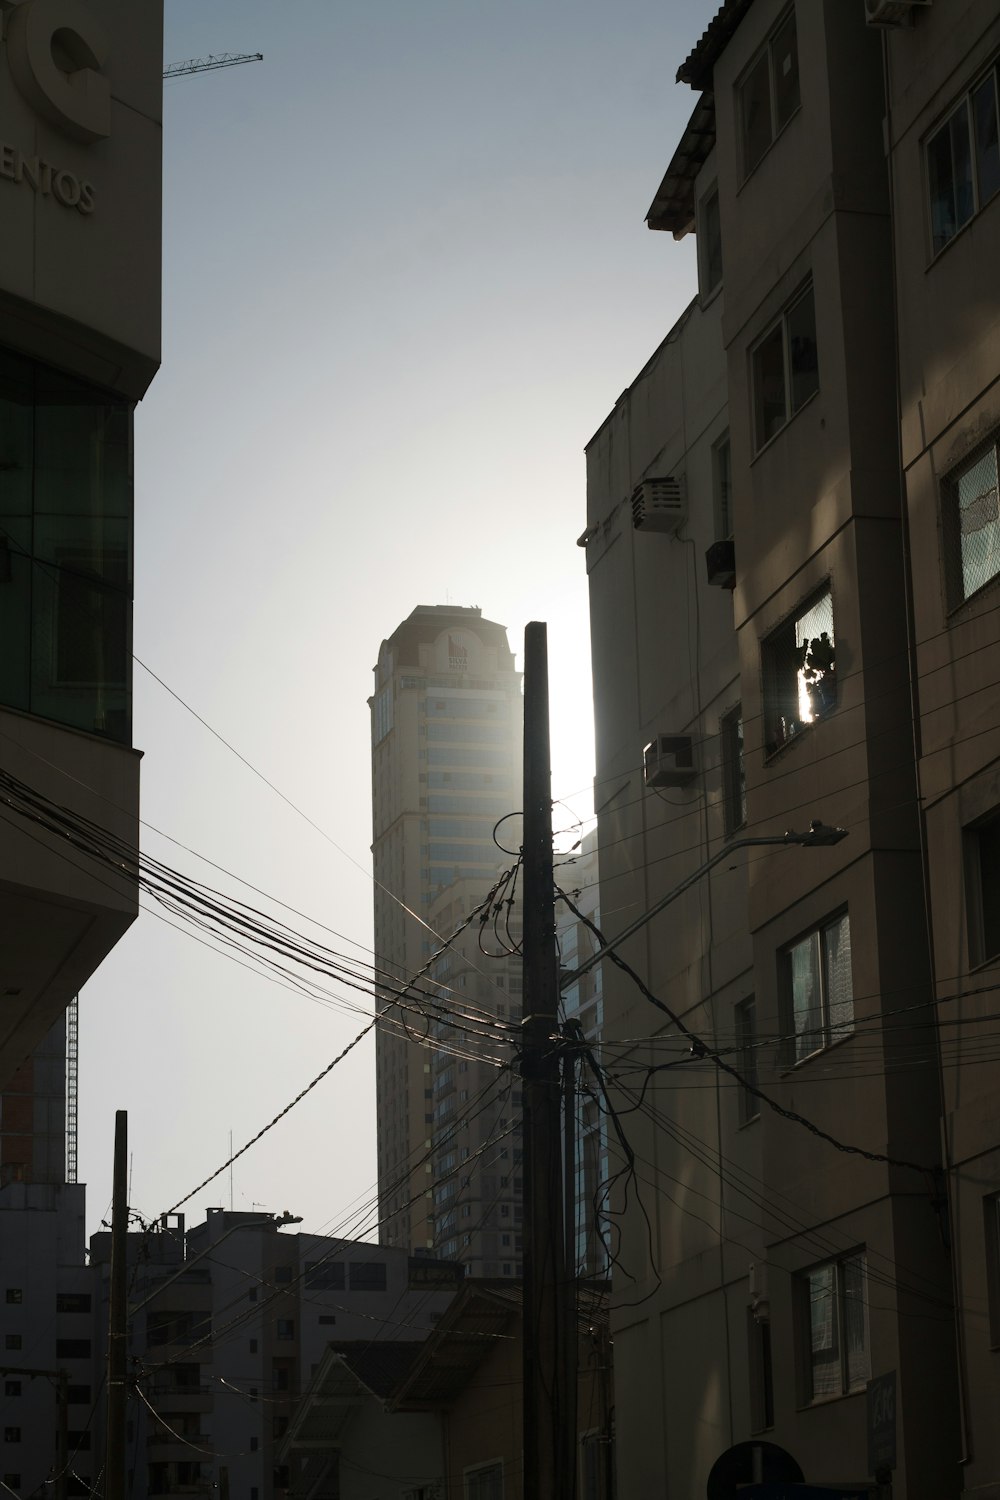 the sun is shining behind a tall building